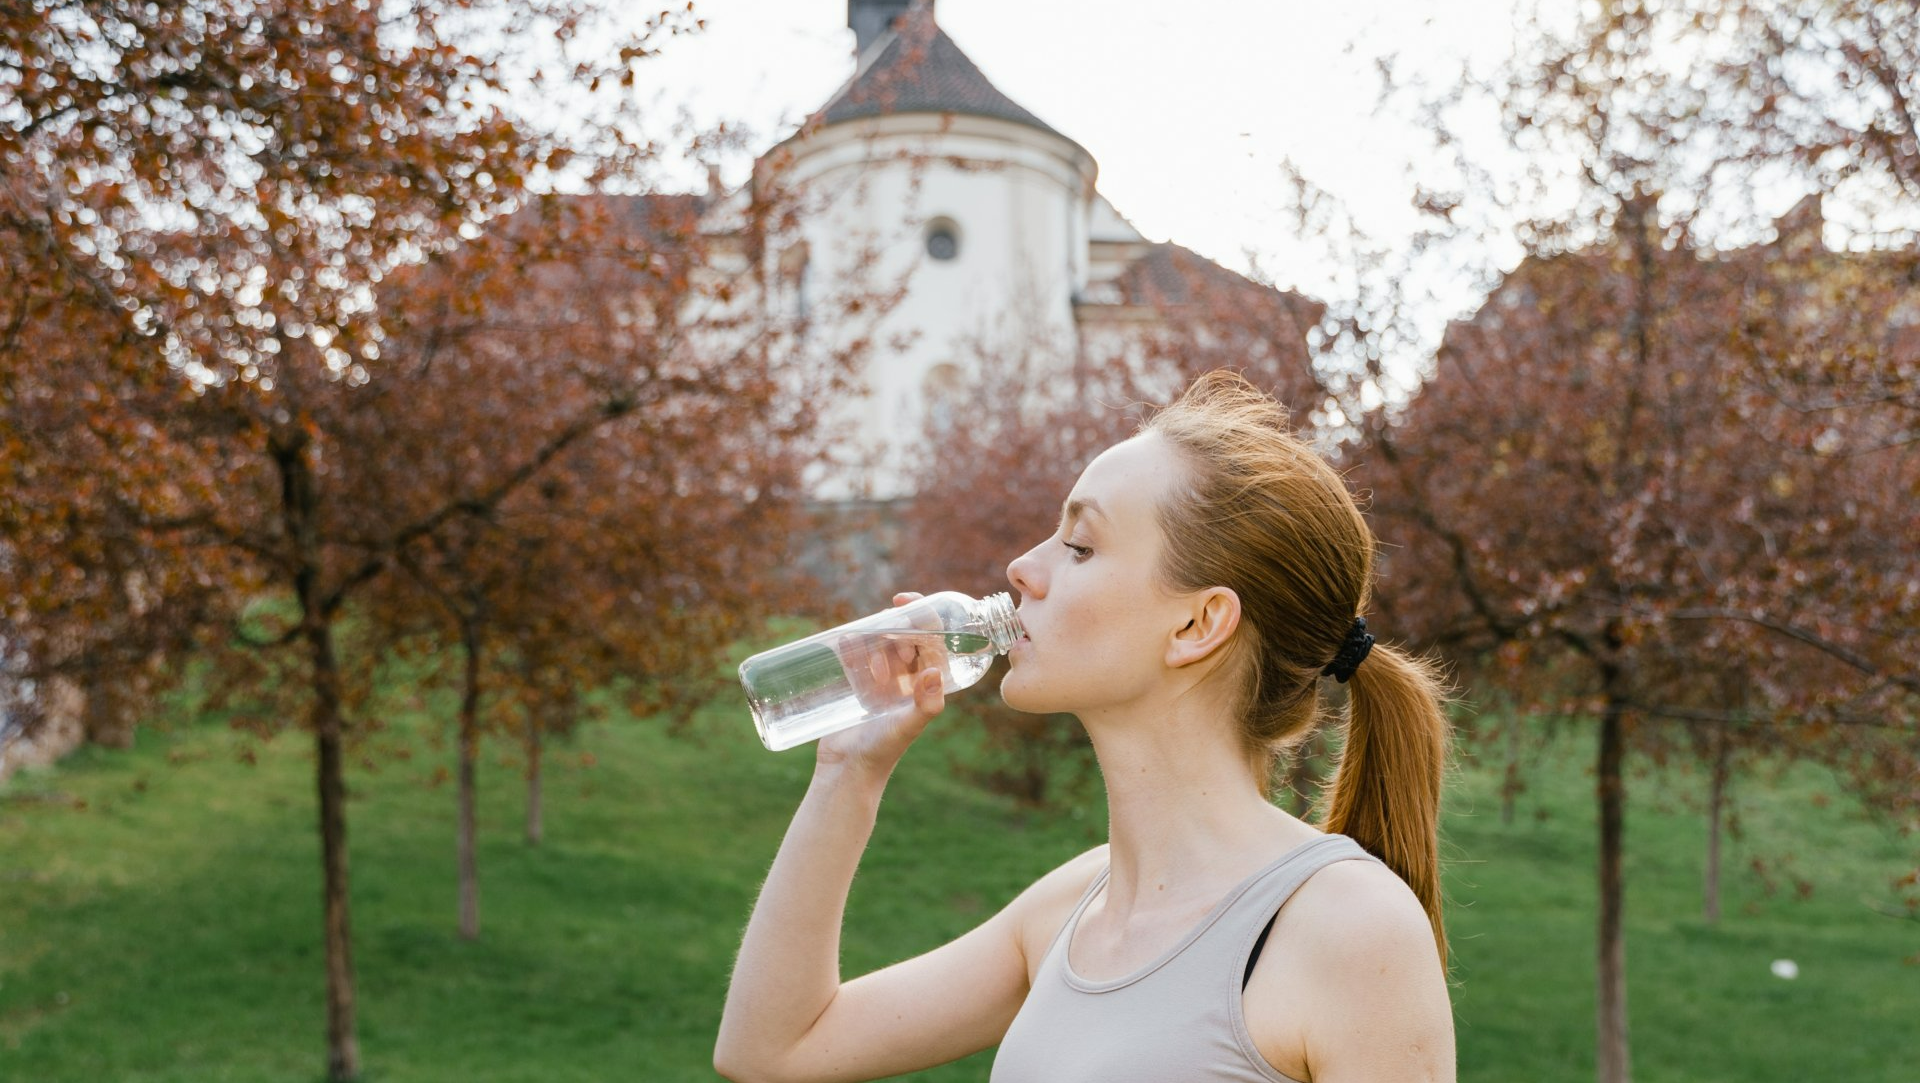 Young woman runner drinking bottled water from plastic bottle.